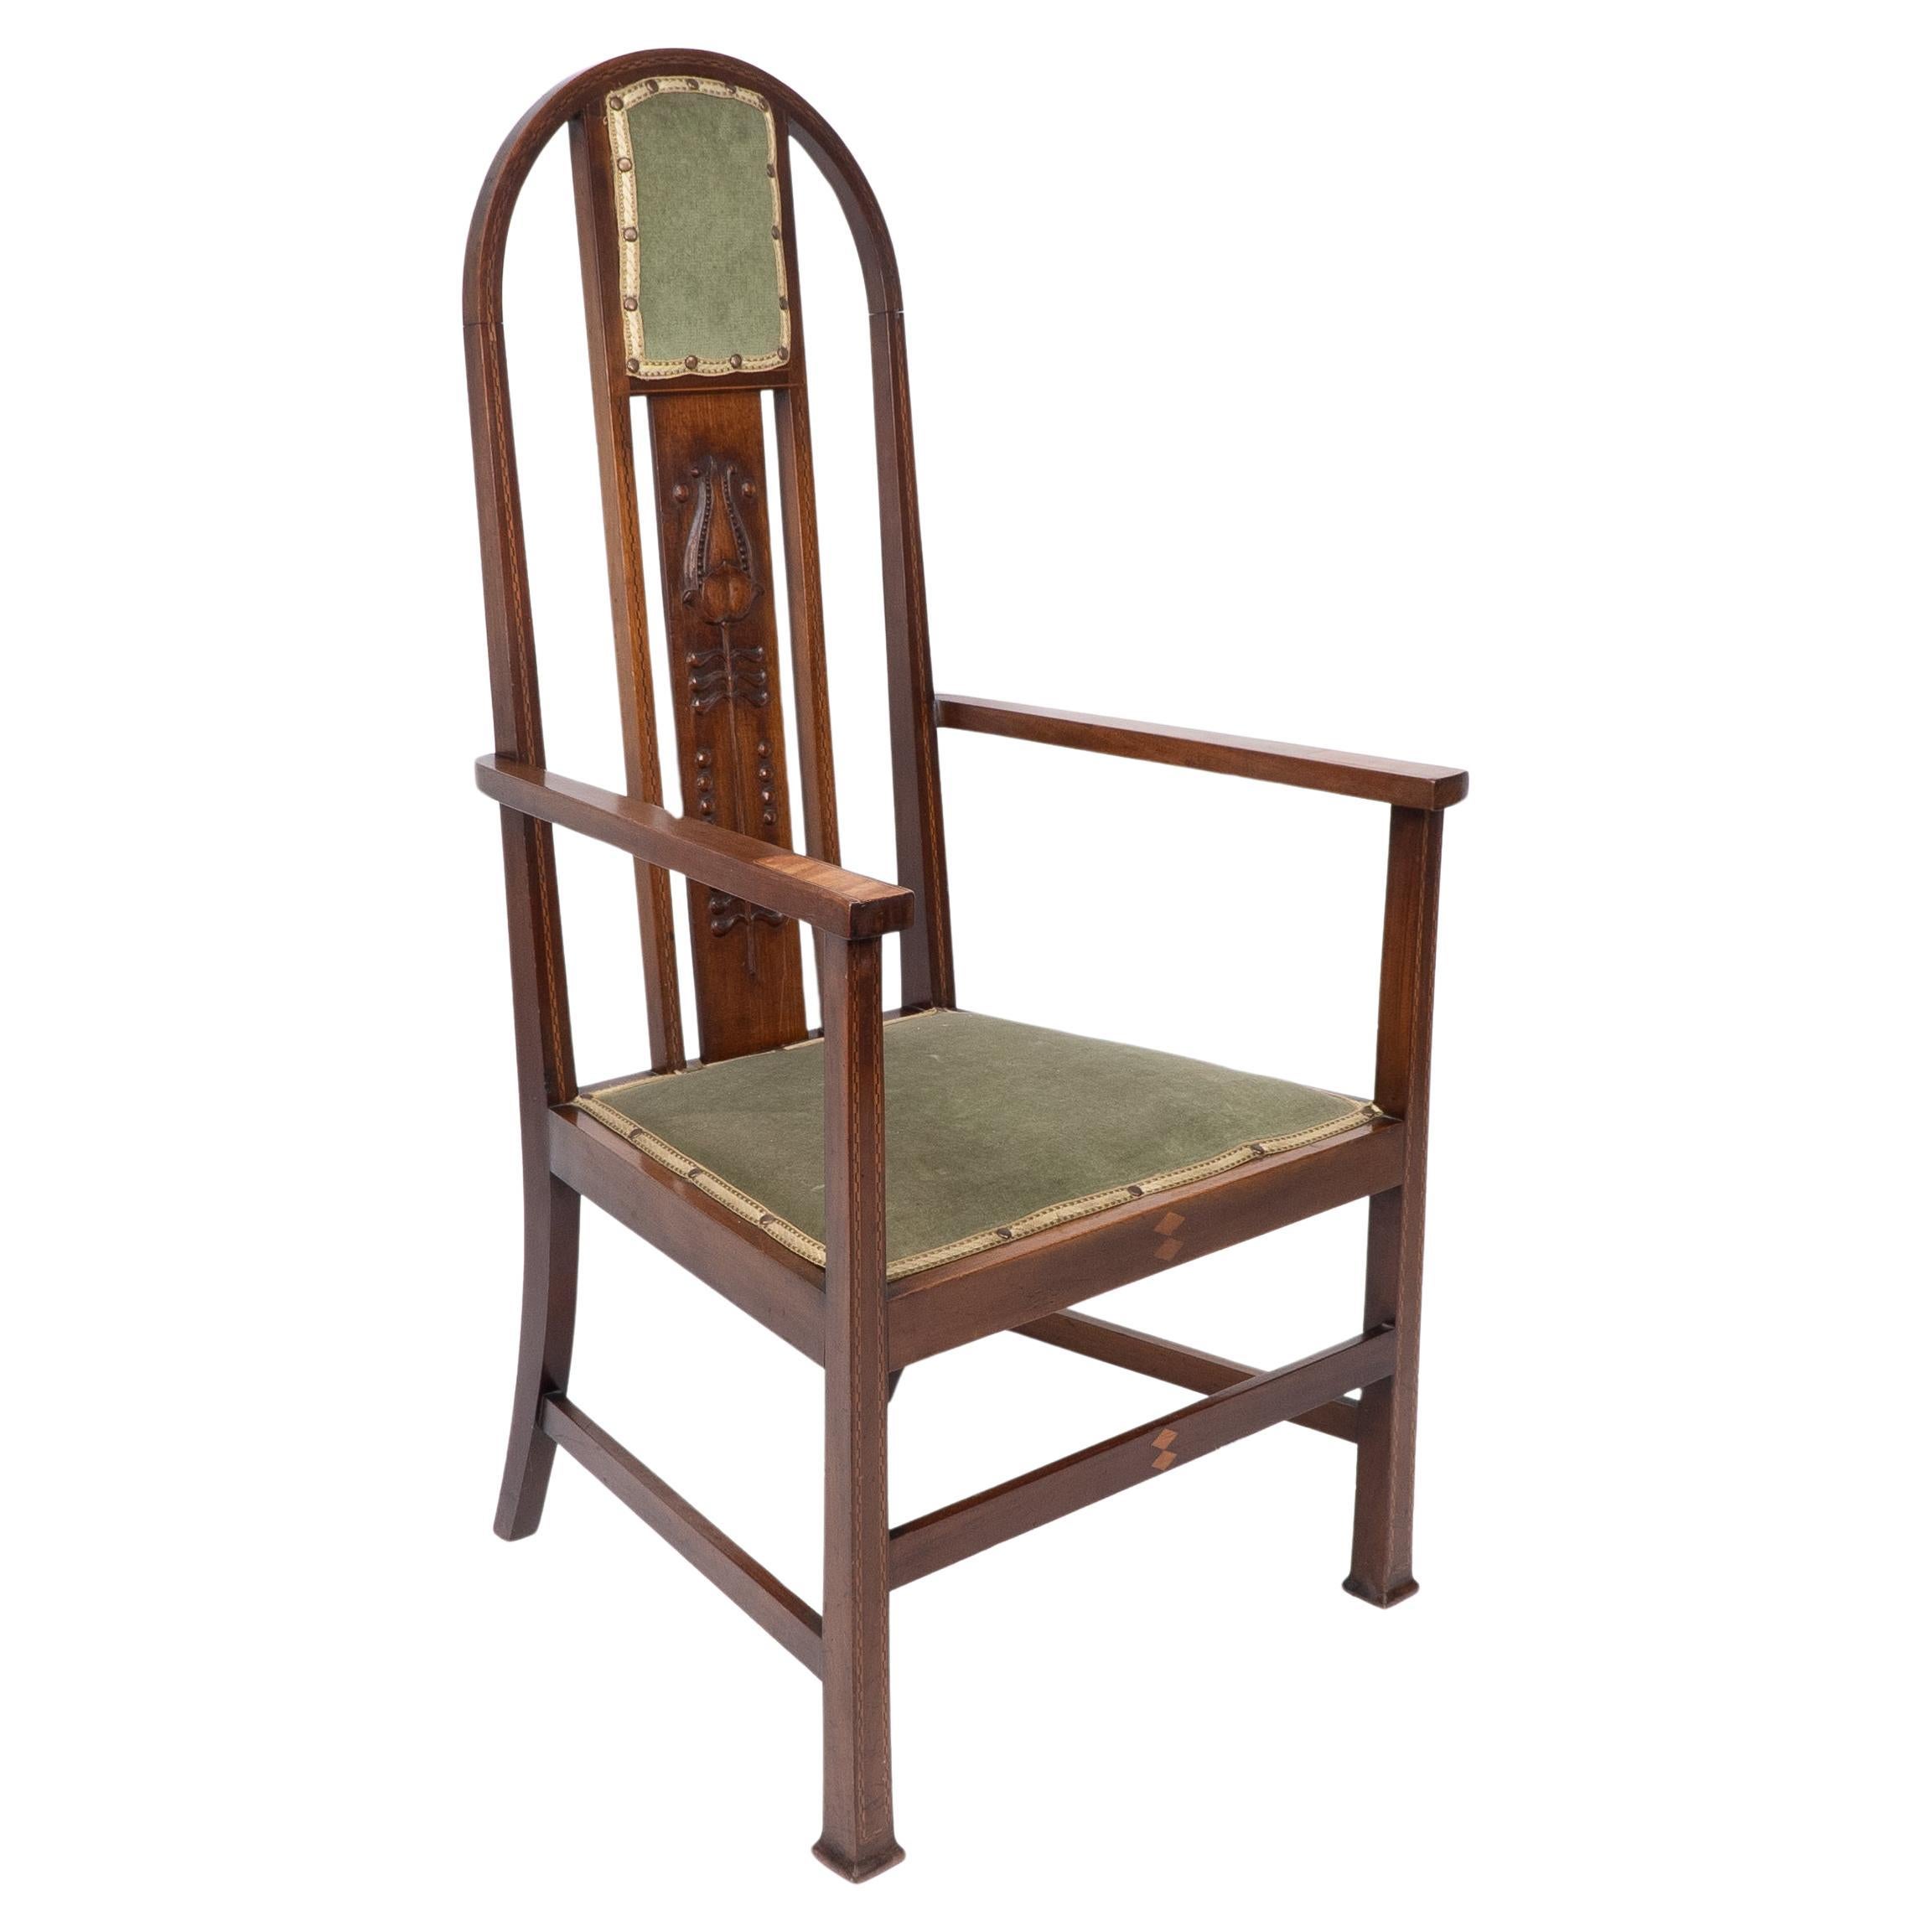 Liberty and Co attri, A Pair of Arts and Crafts mahogany and Inlaid Armchair For Sale